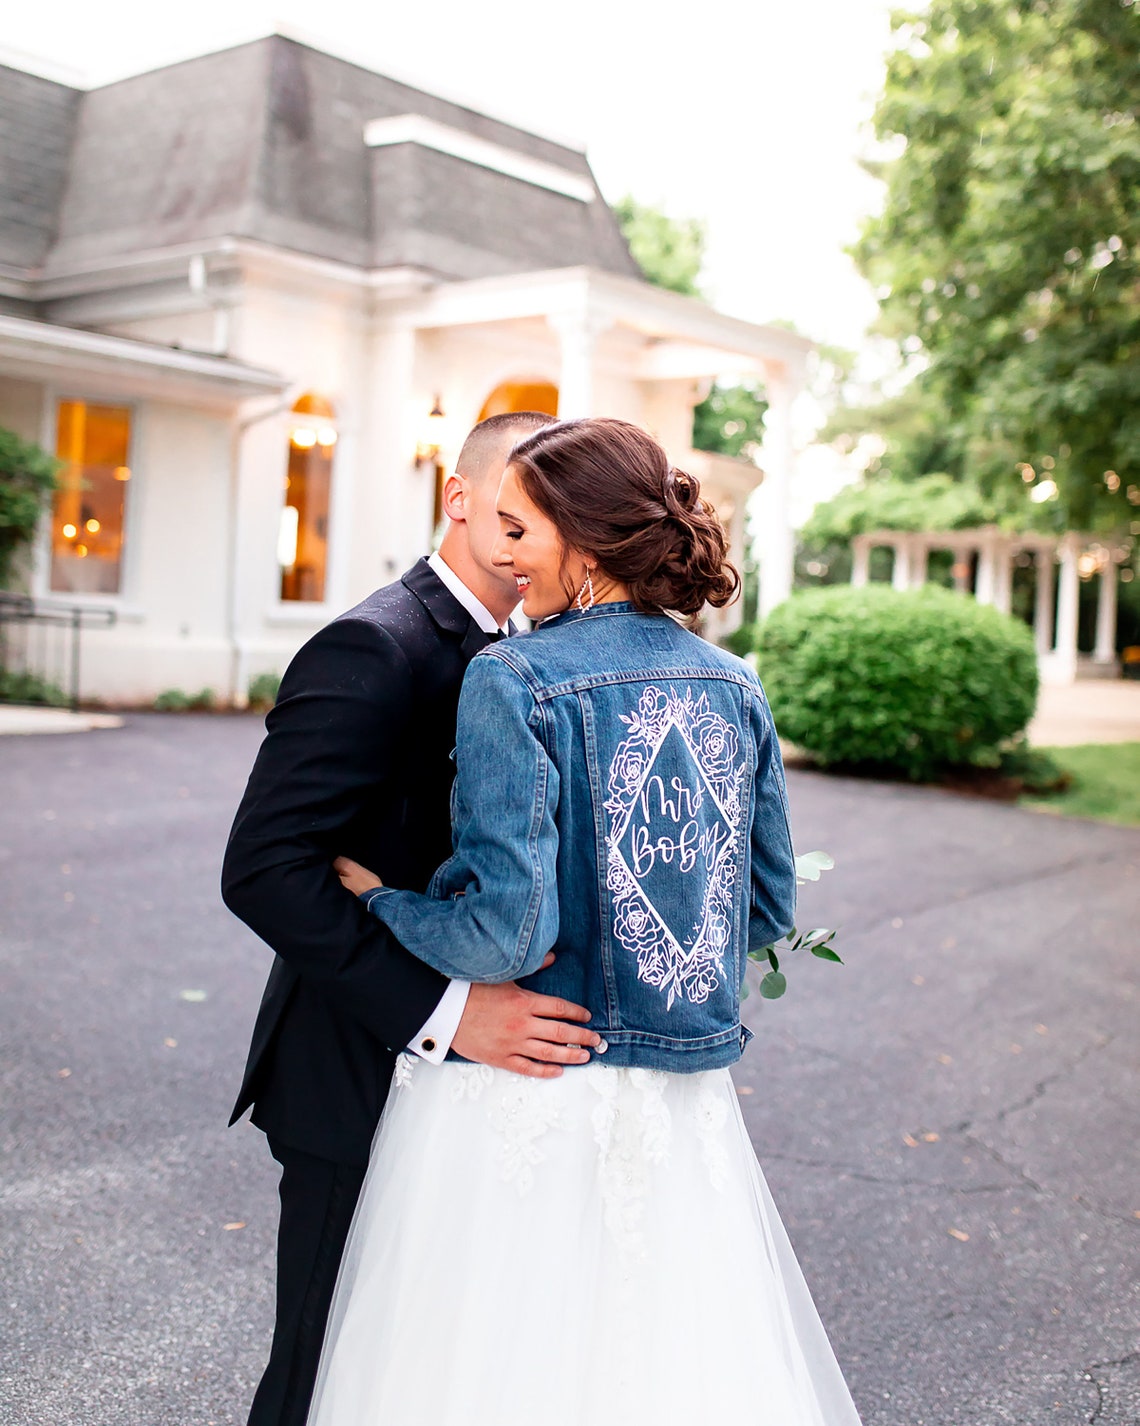 This image shows a bride and groom. The bride is wearing a customised denim jacket.